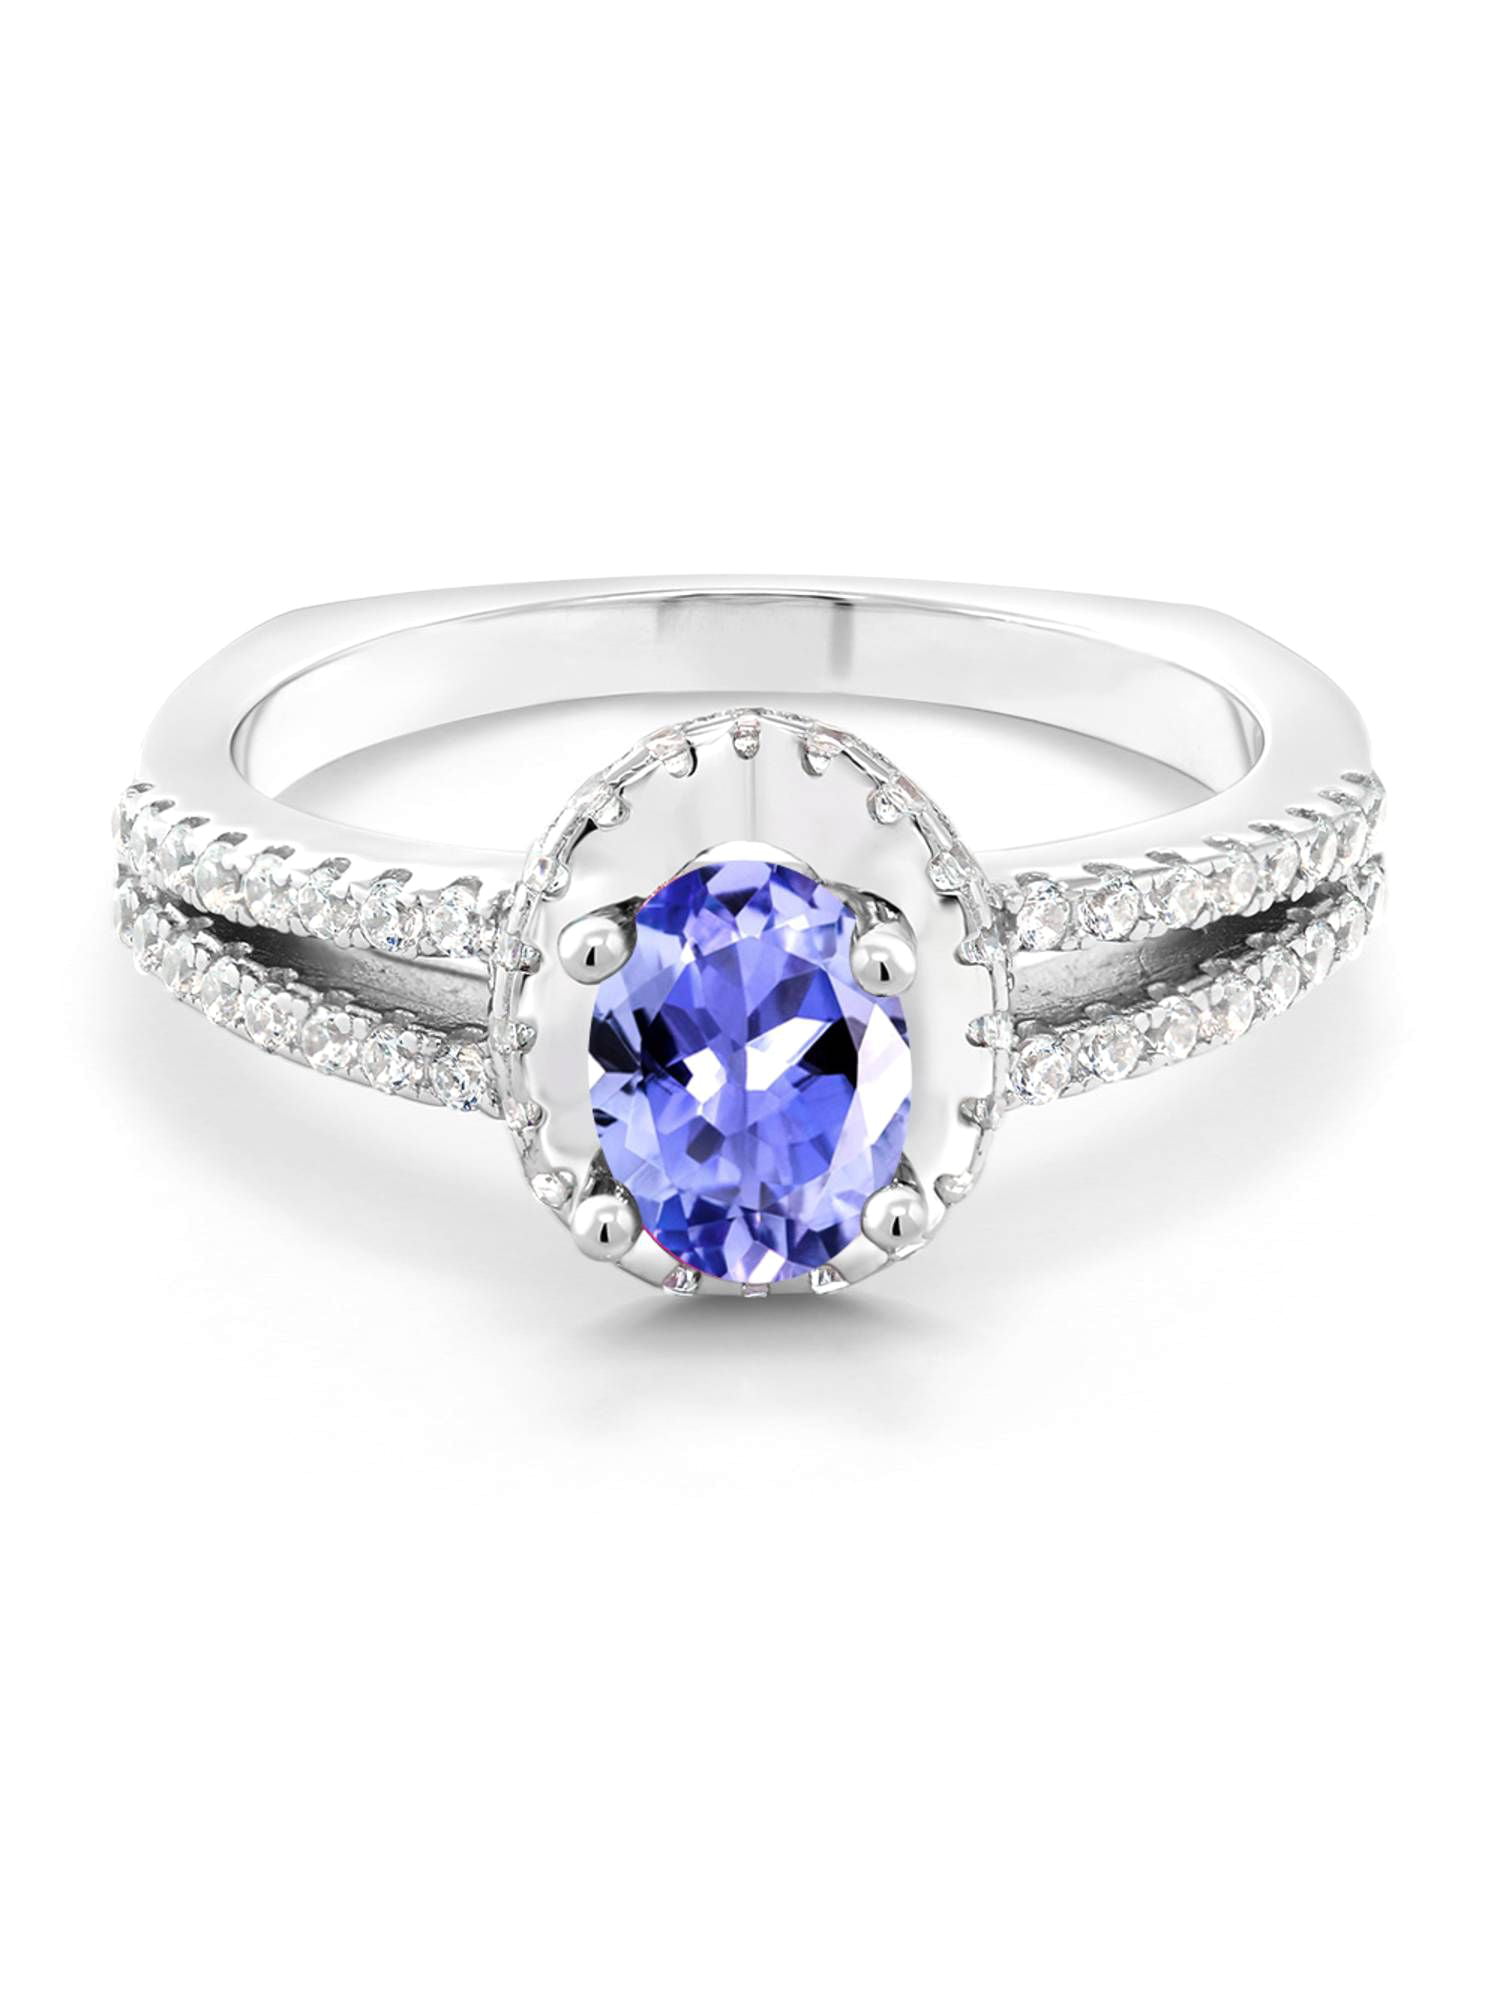 925 Sterling Silver Genuine Blue Topaz and Tanzanite Ring 2.78 Carat Multiple Sizes 